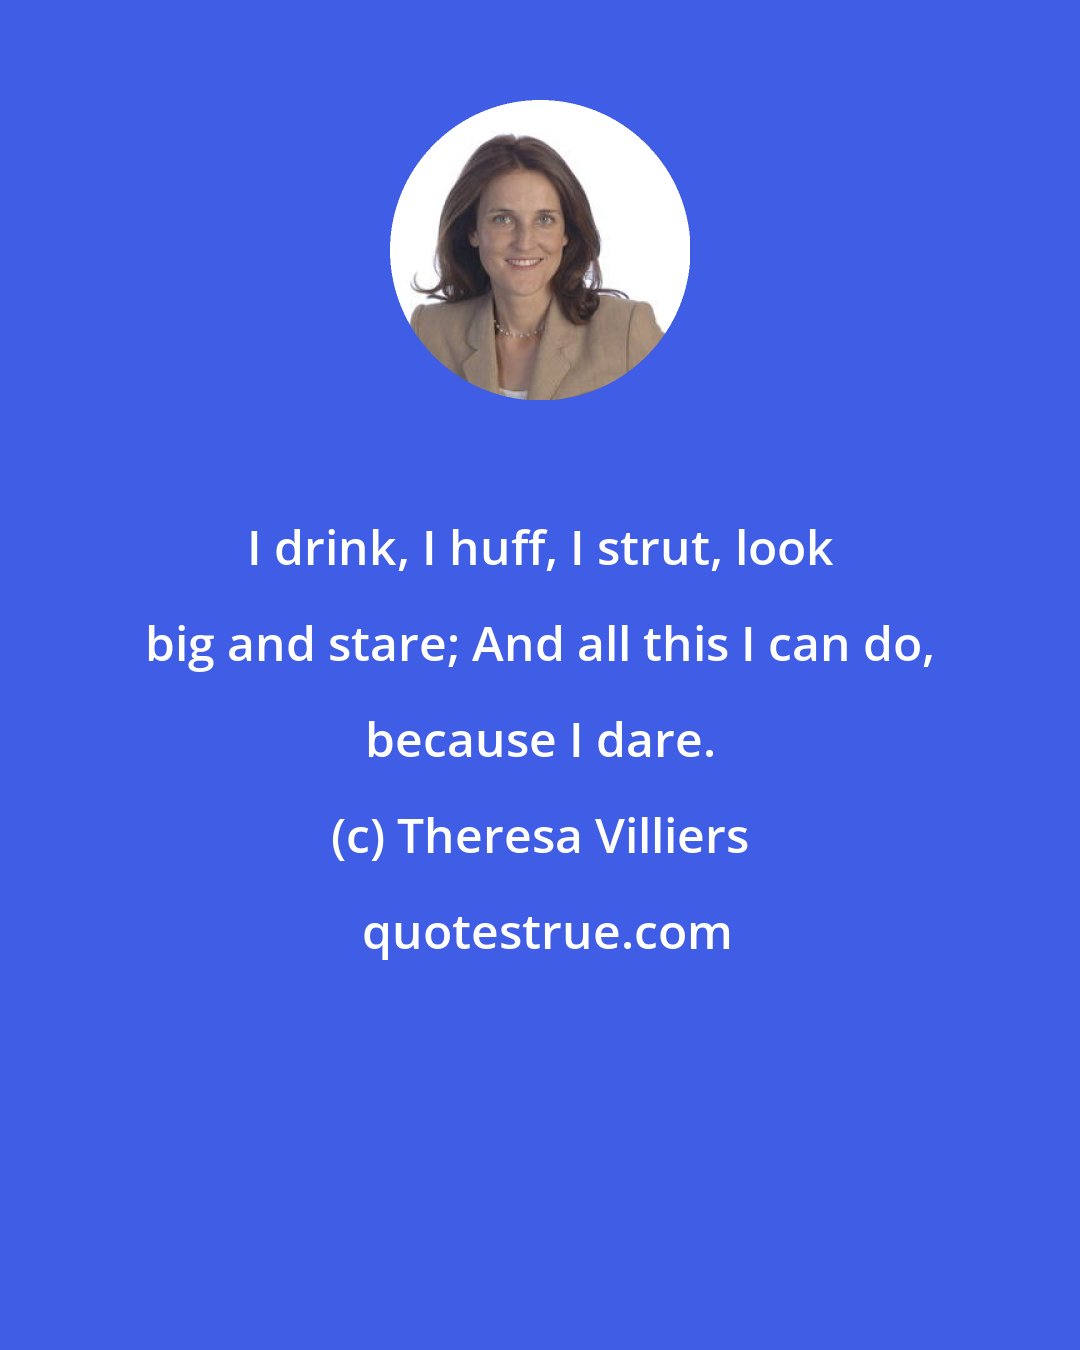 Theresa Villiers: I drink, I huff, I strut, look big and stare; And all this I can do, because I dare.